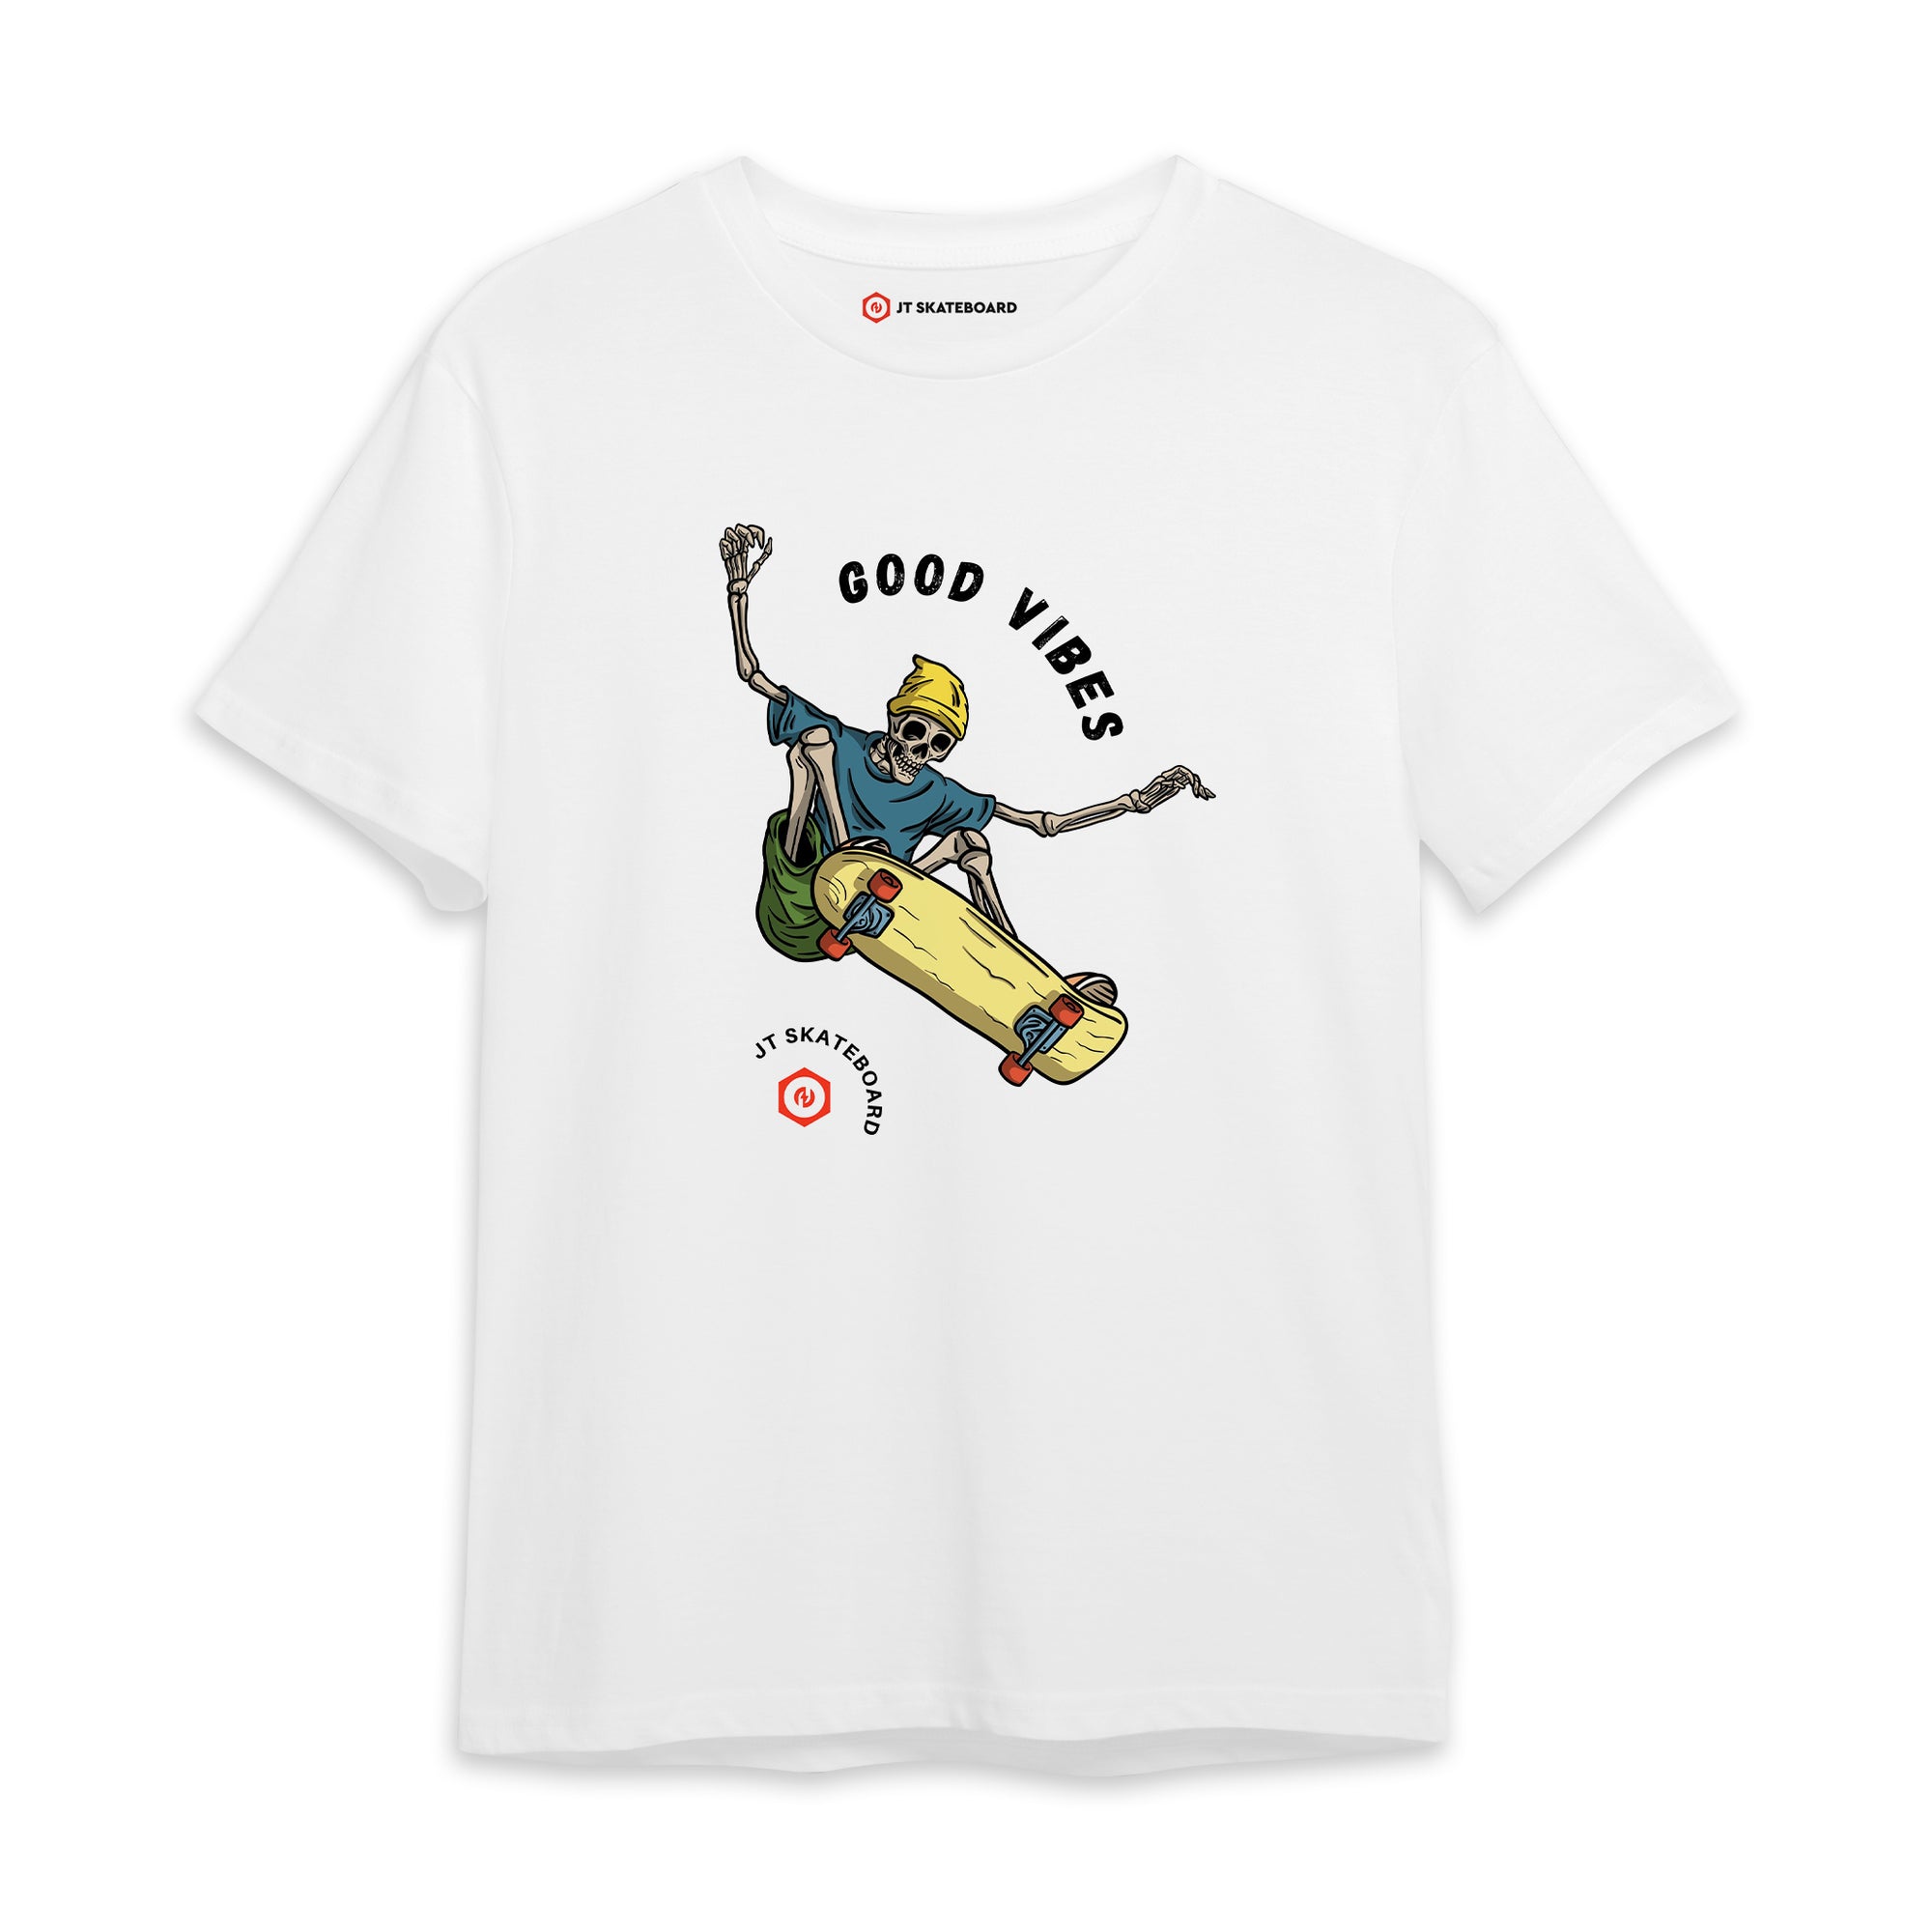 Good Vibes | Relaxed Loose Fitting T-Shirts - JT Skateboard - JT Skateboard